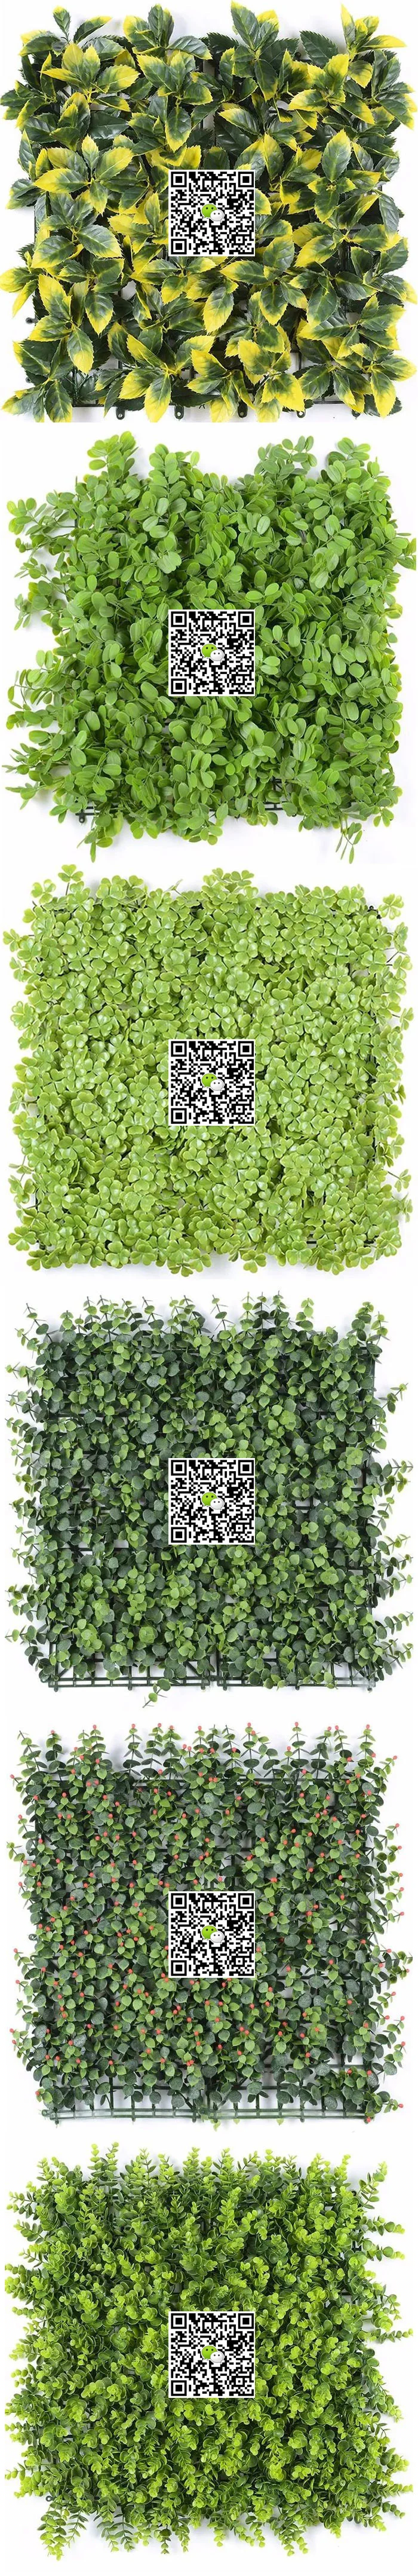 Wvt Outdoor Artificial Plastic Boxwood Hedge IVY Green Wall Fence Leaf Vertical Garden